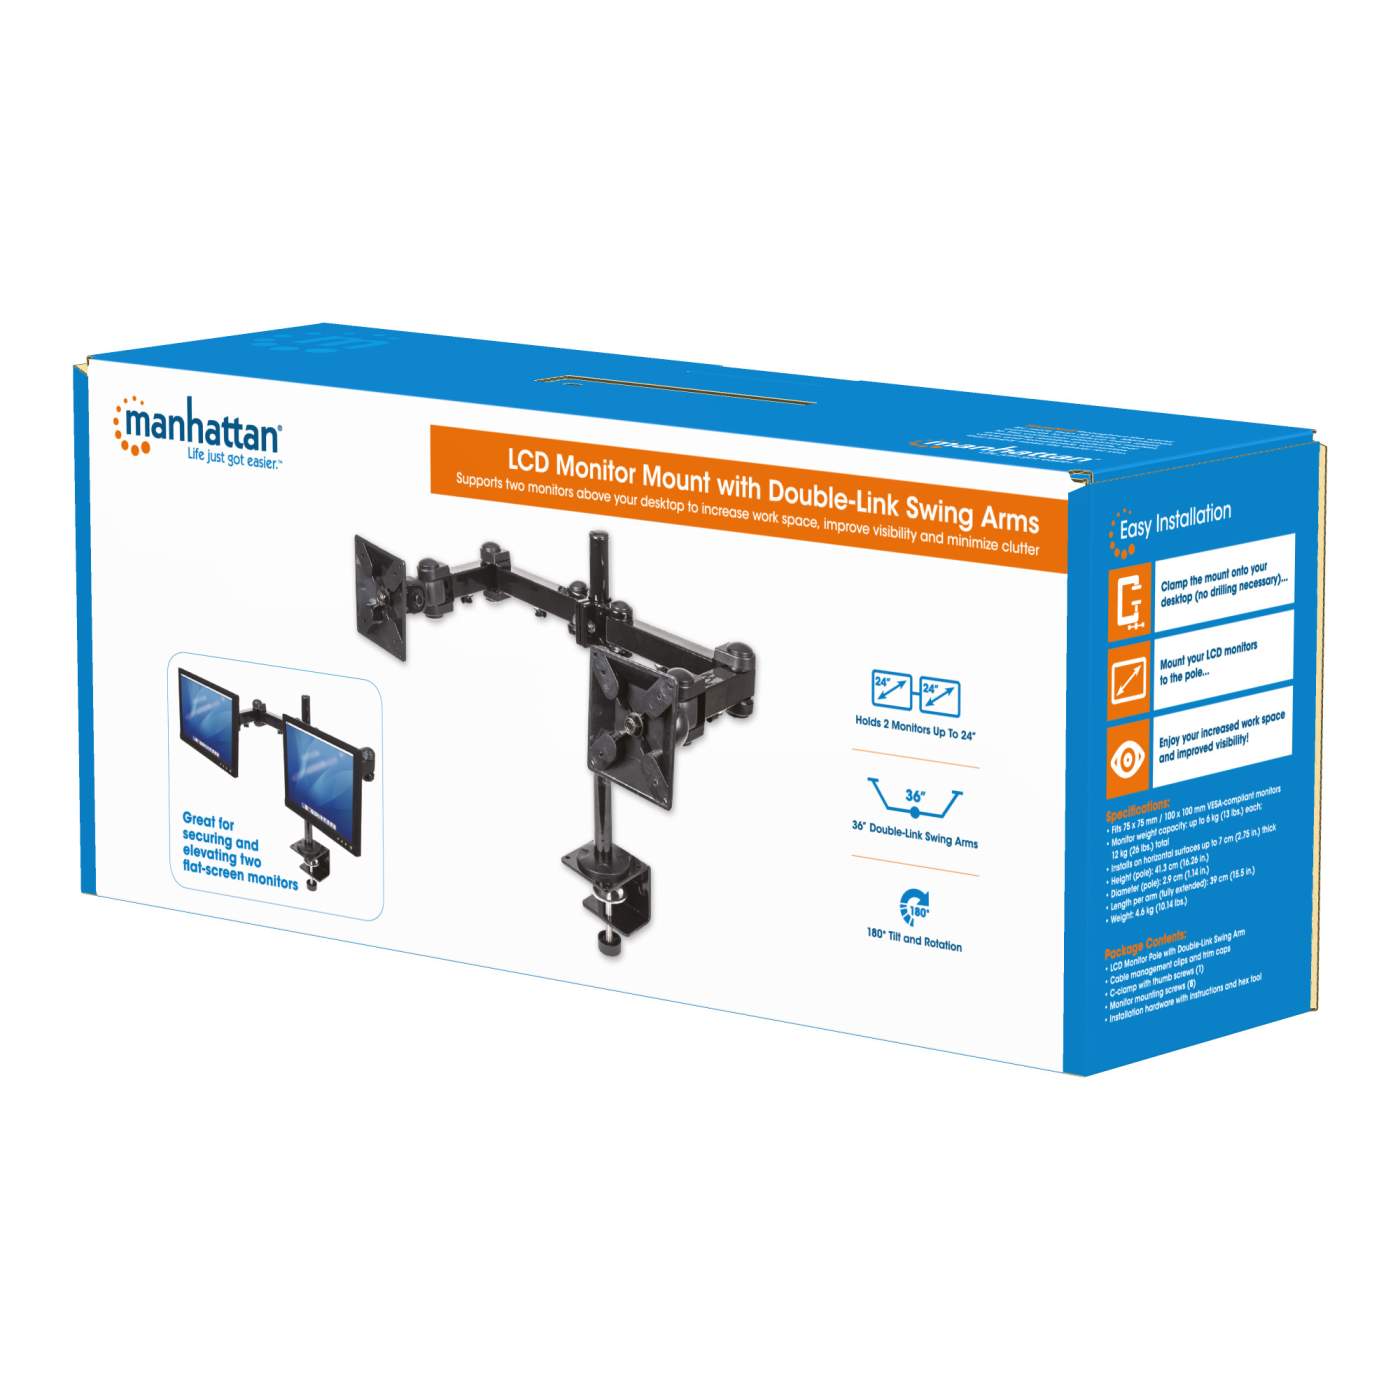 LCD Monitor Mount with Double-Link Swing Arms Packaging Image 2